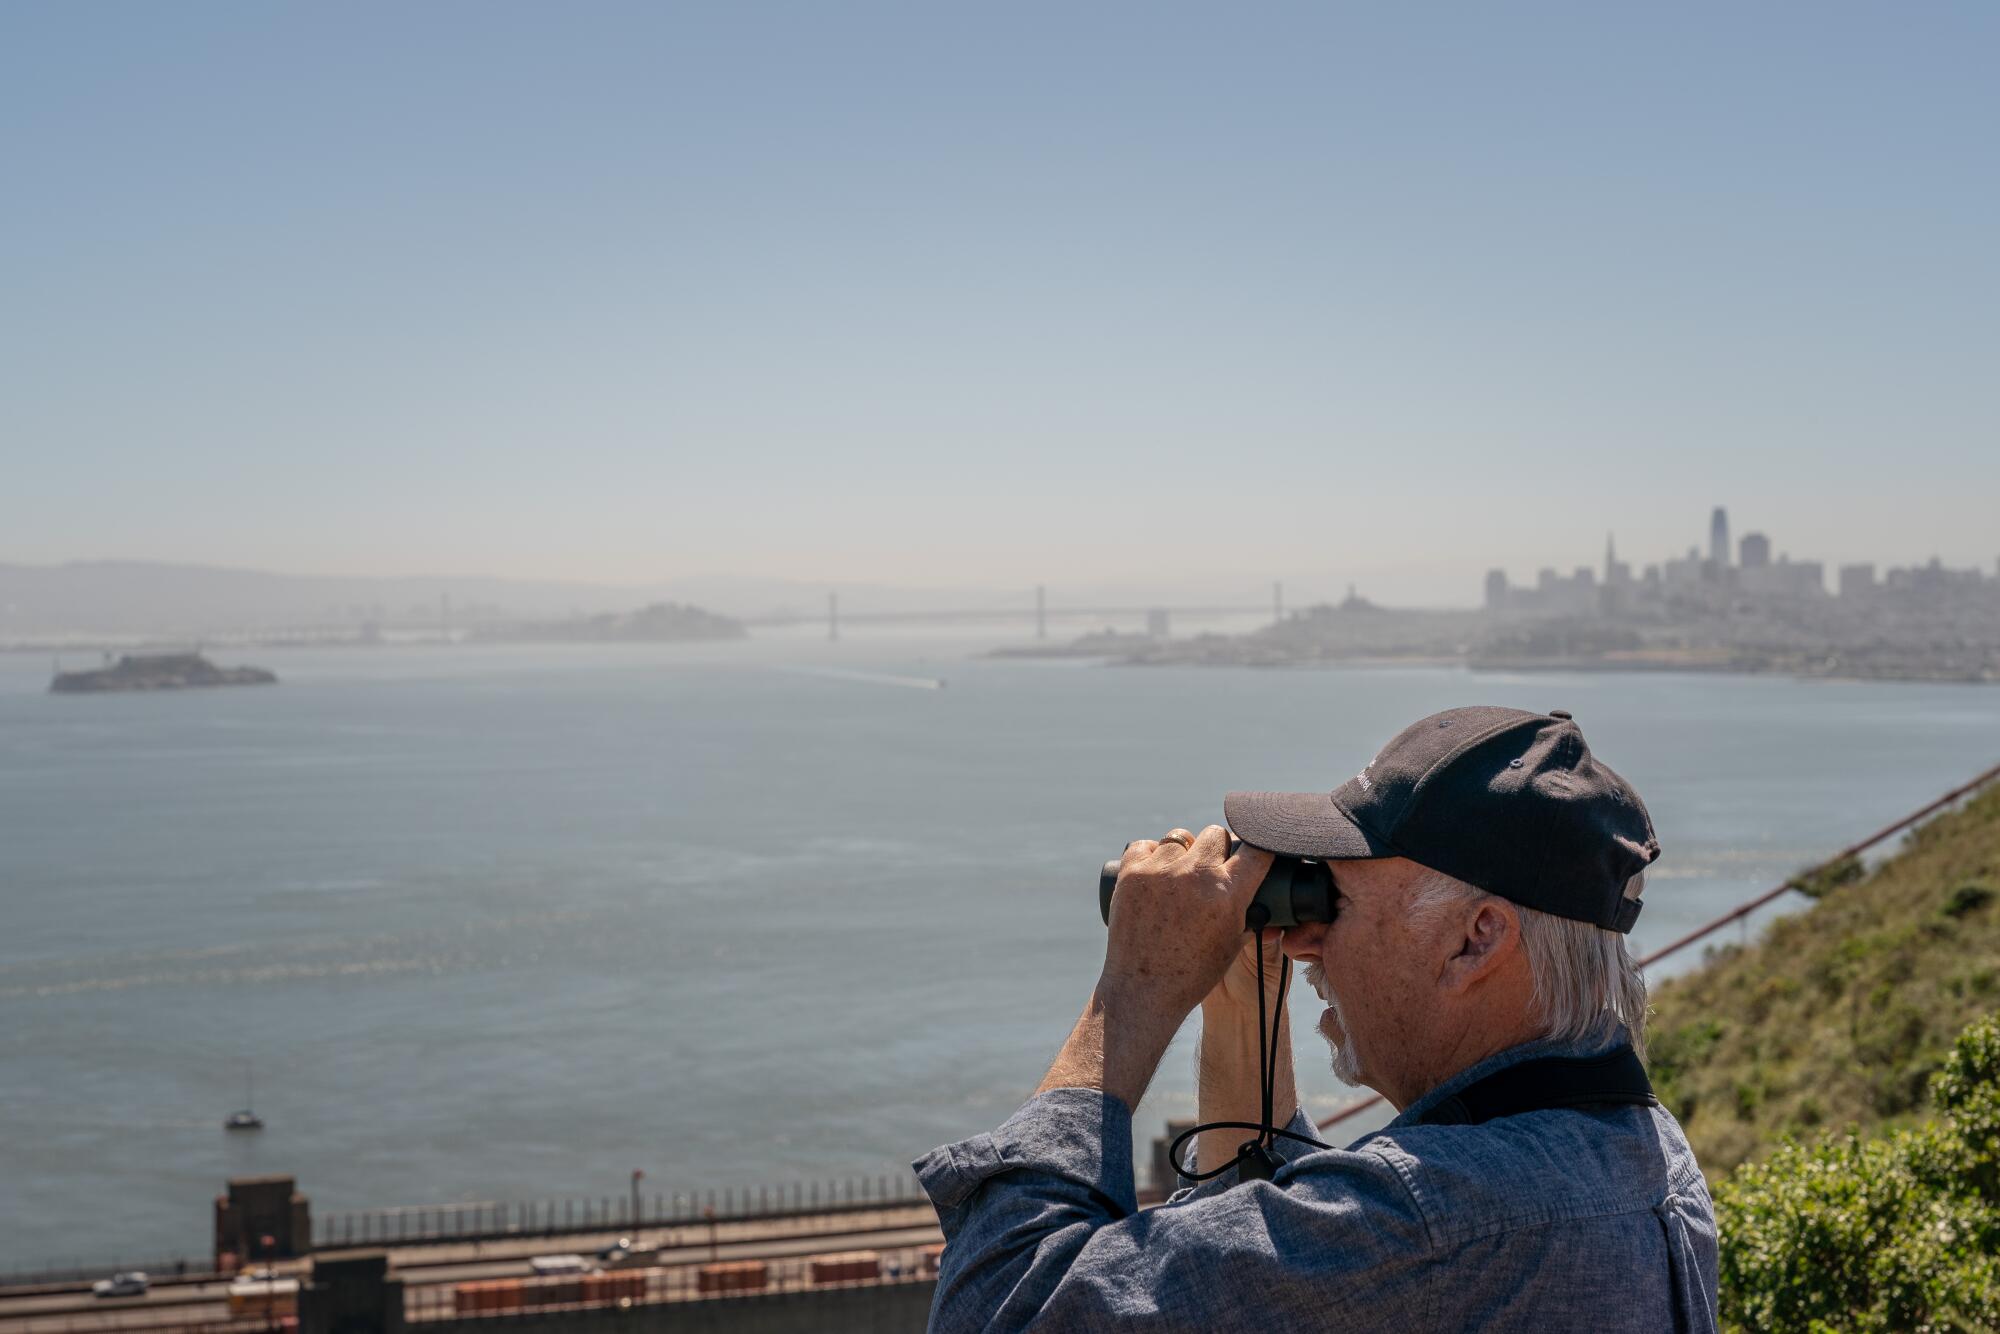 Bill Keener looks through binoculars at the San Francisco Bay, with the city skyline in the background. 